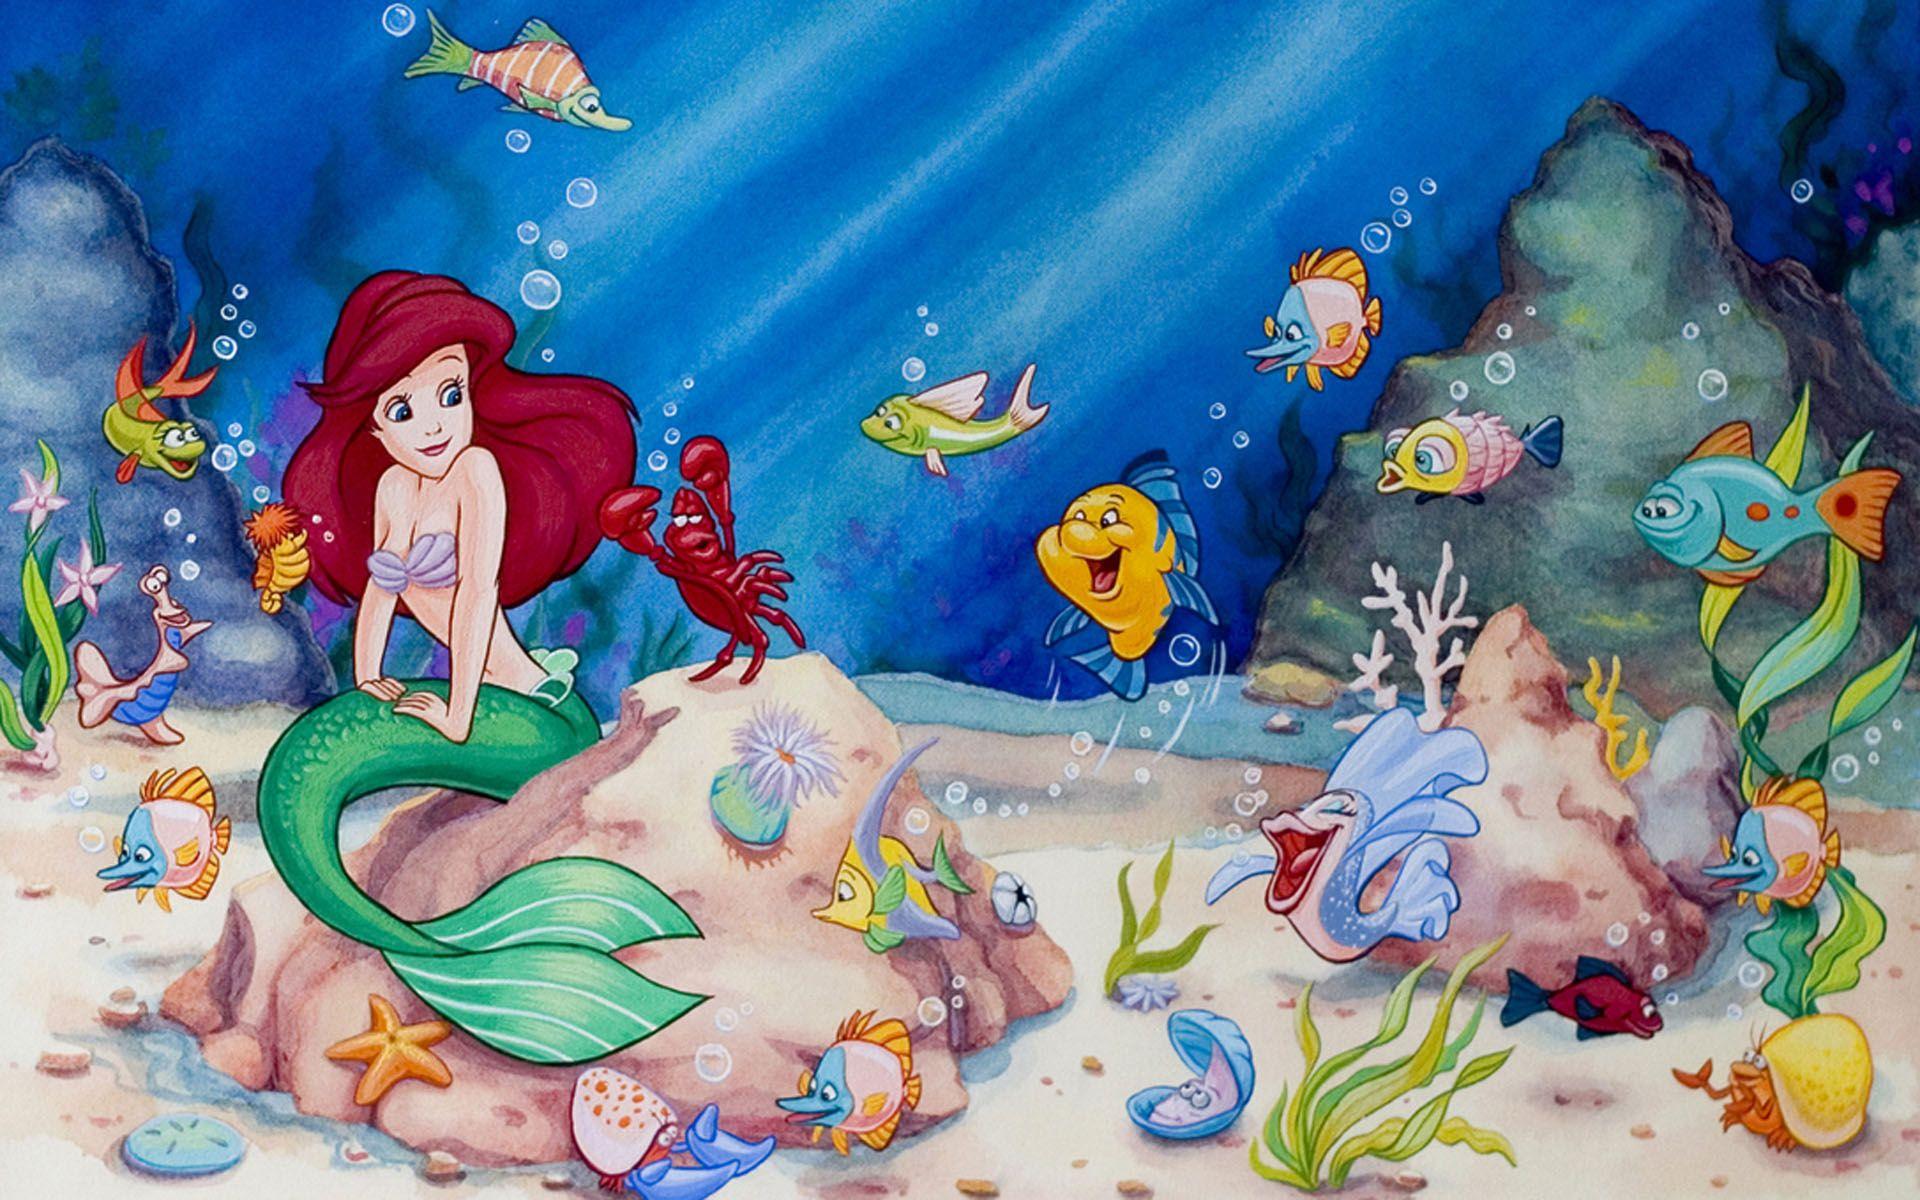 Little Mermaid Wallpapers High Definition 16287.